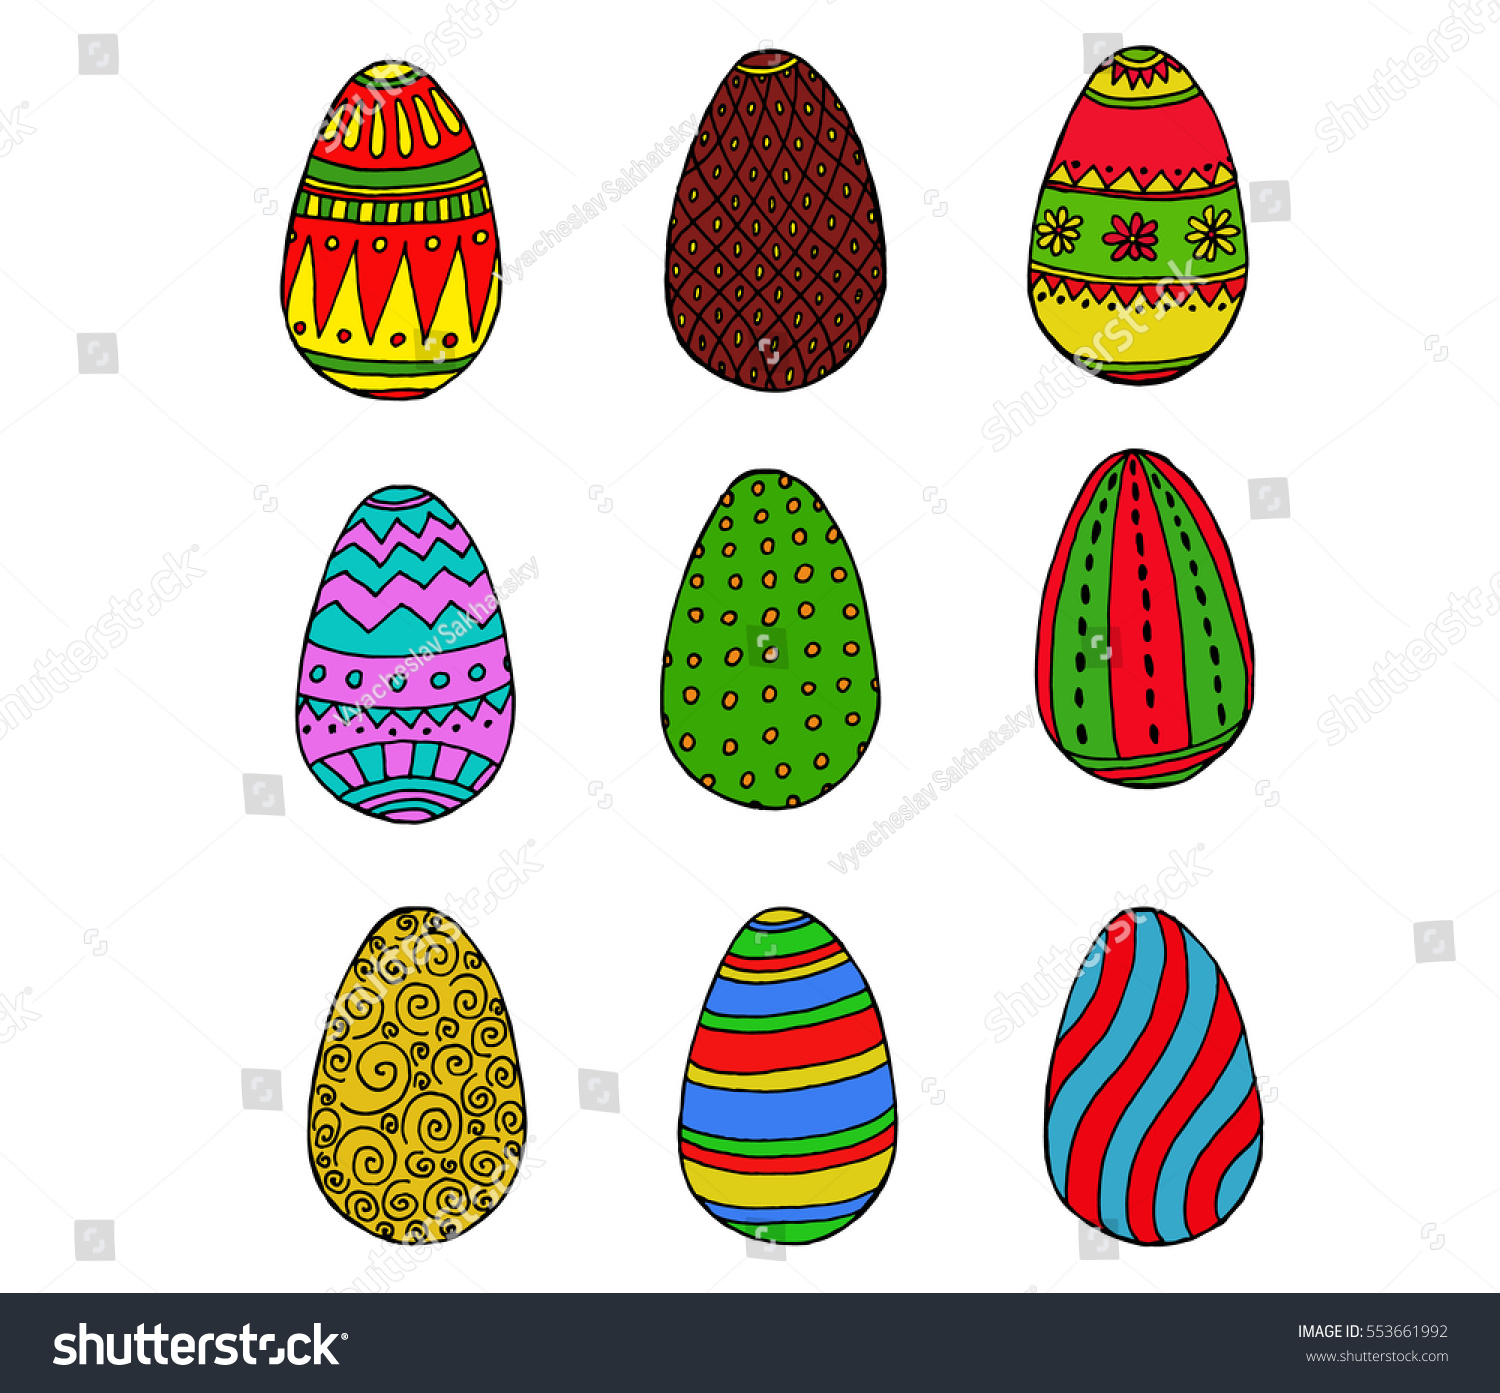  Color Easter eggs collection in doodle style on white background. vector illustration. #553661992